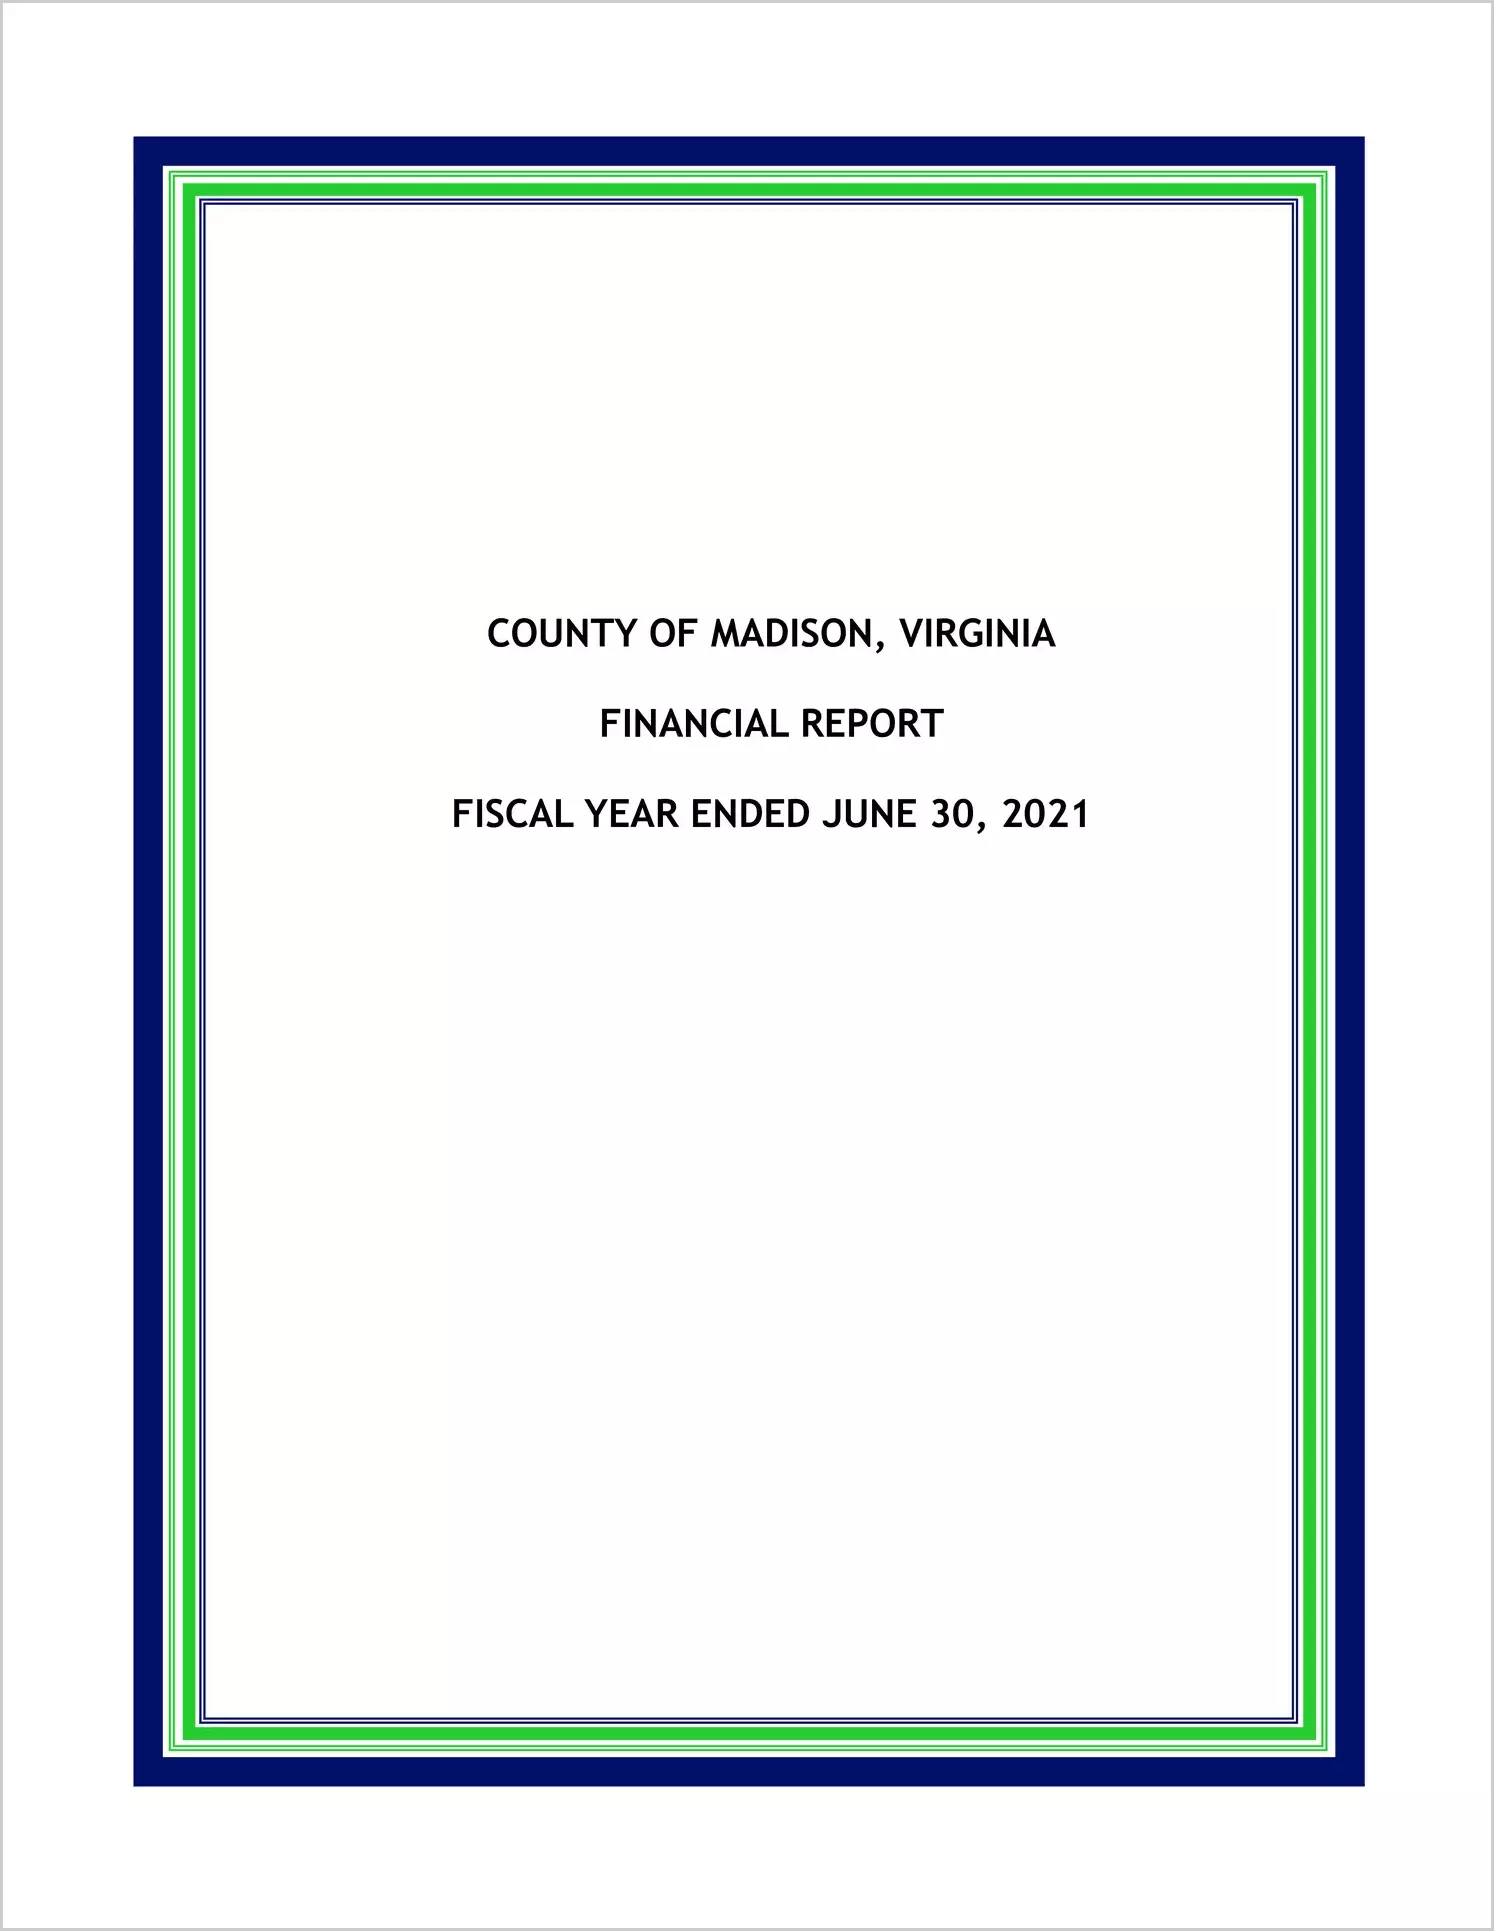 2021 Annual Financial Report for County of Madison